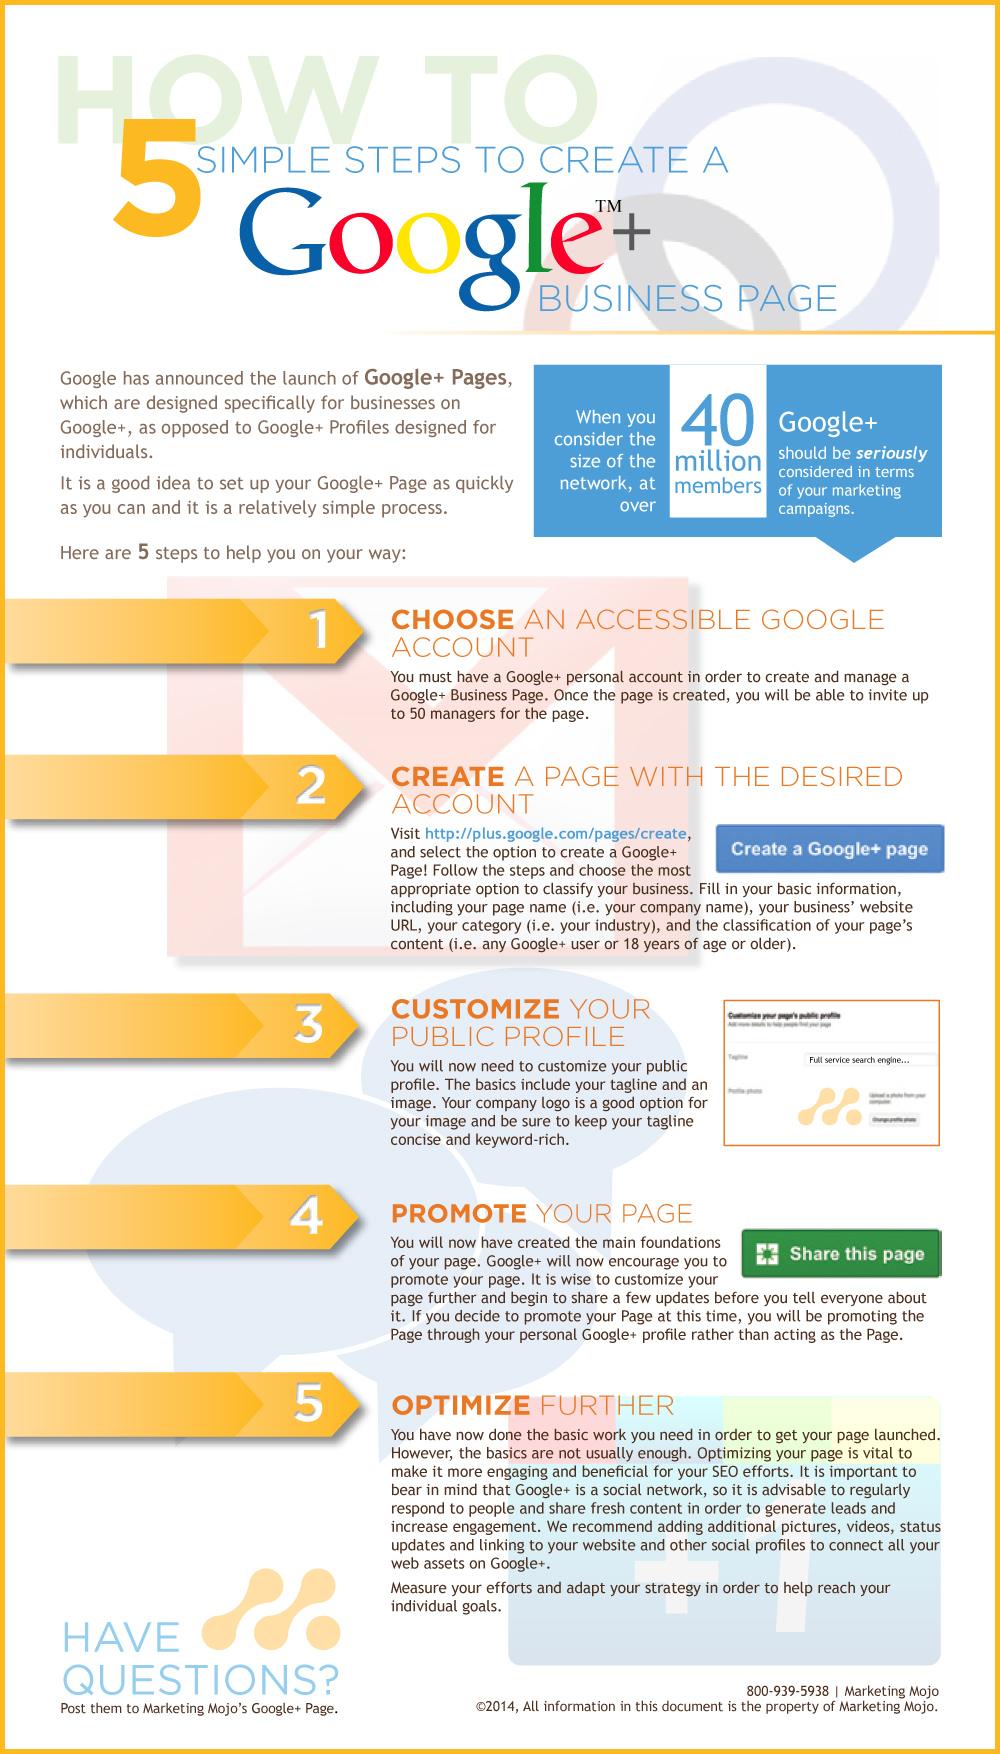 5 Simple Steps to Create a Google+ Business Page 